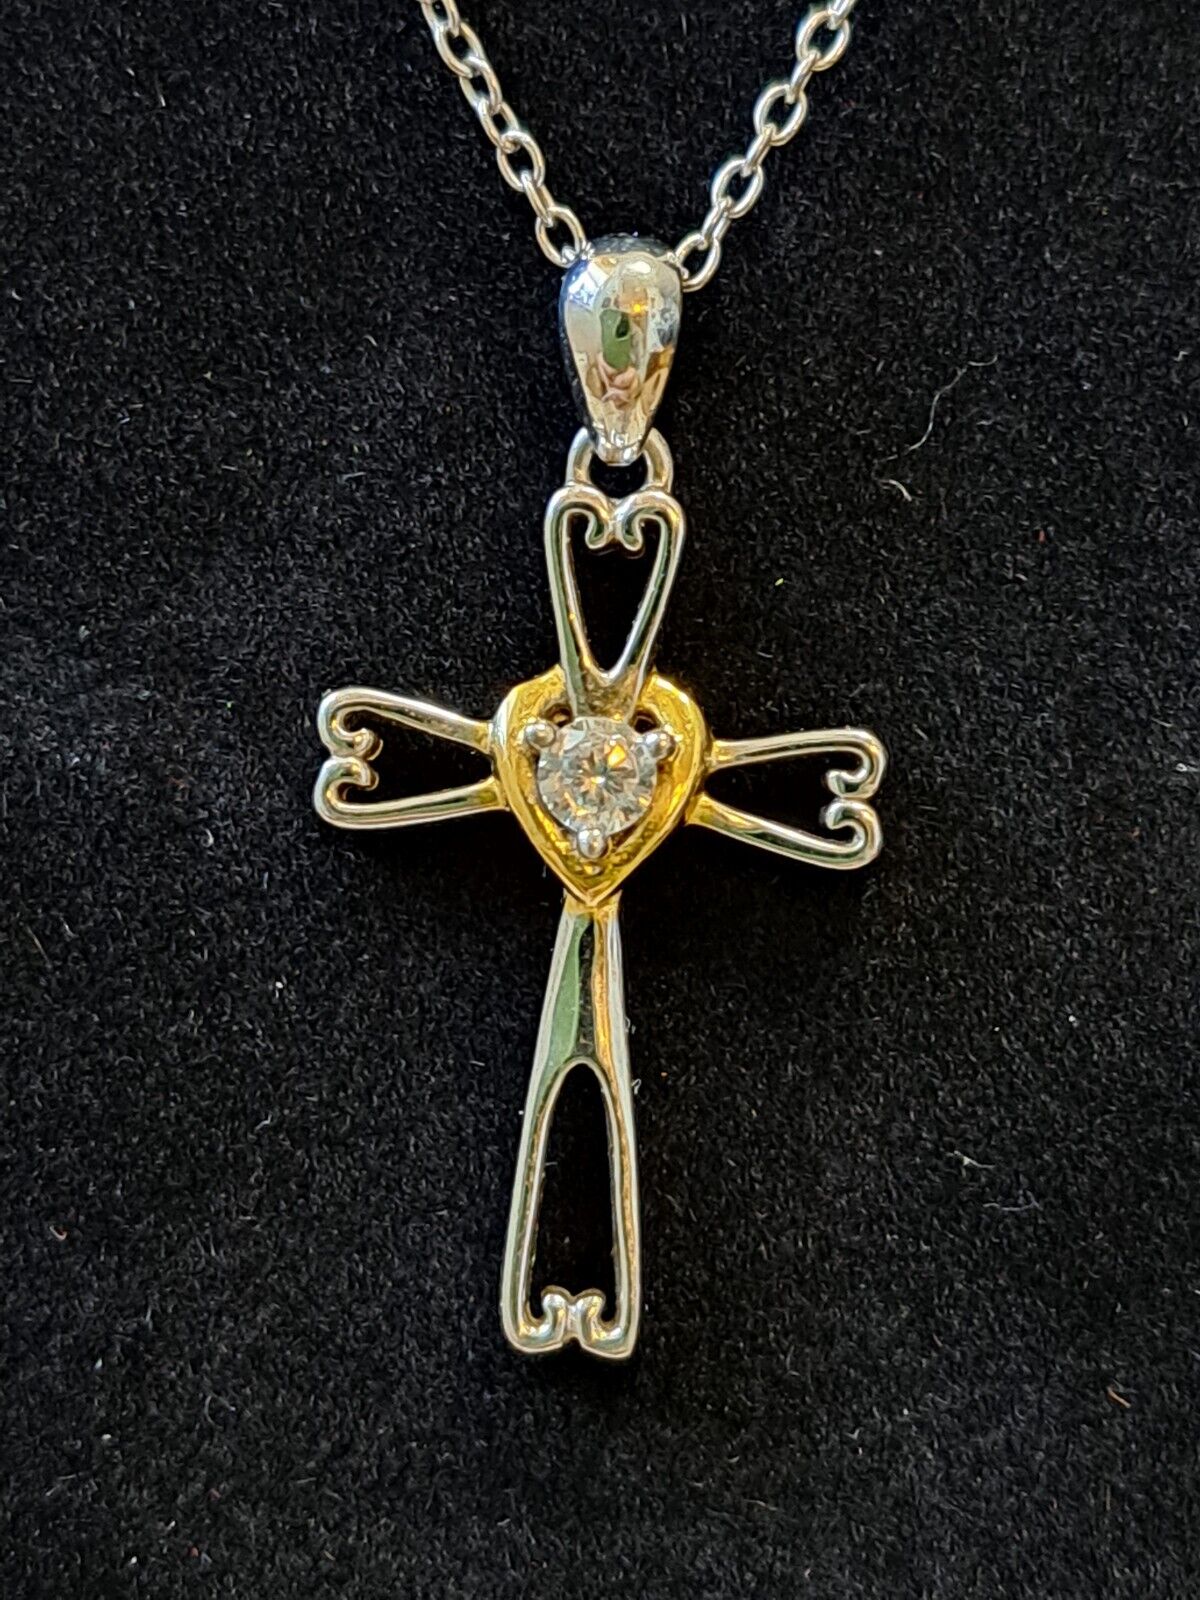 Sterling Silver Cross Pendant Necklace Gold Accents Hearts CZ